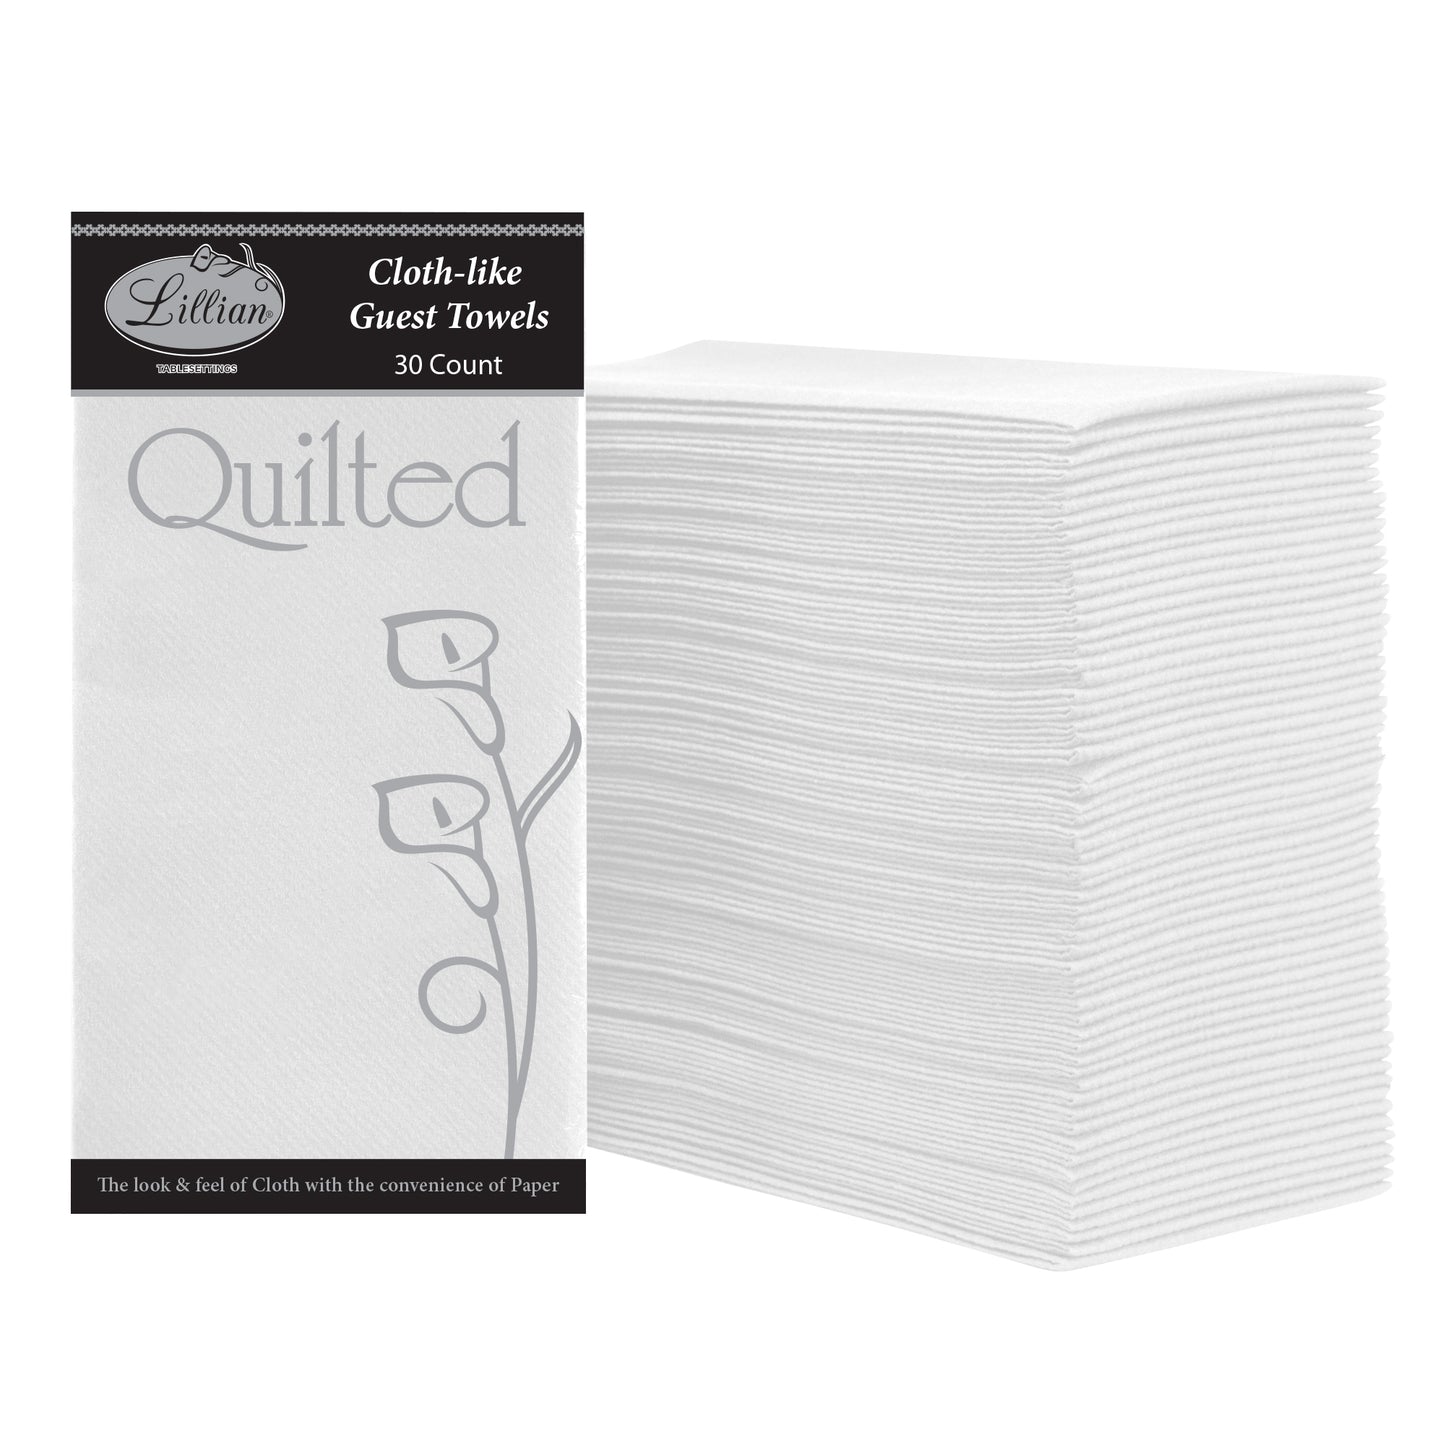 Quilted Premium Paper Cloth-Like Guest Towel - King Zak